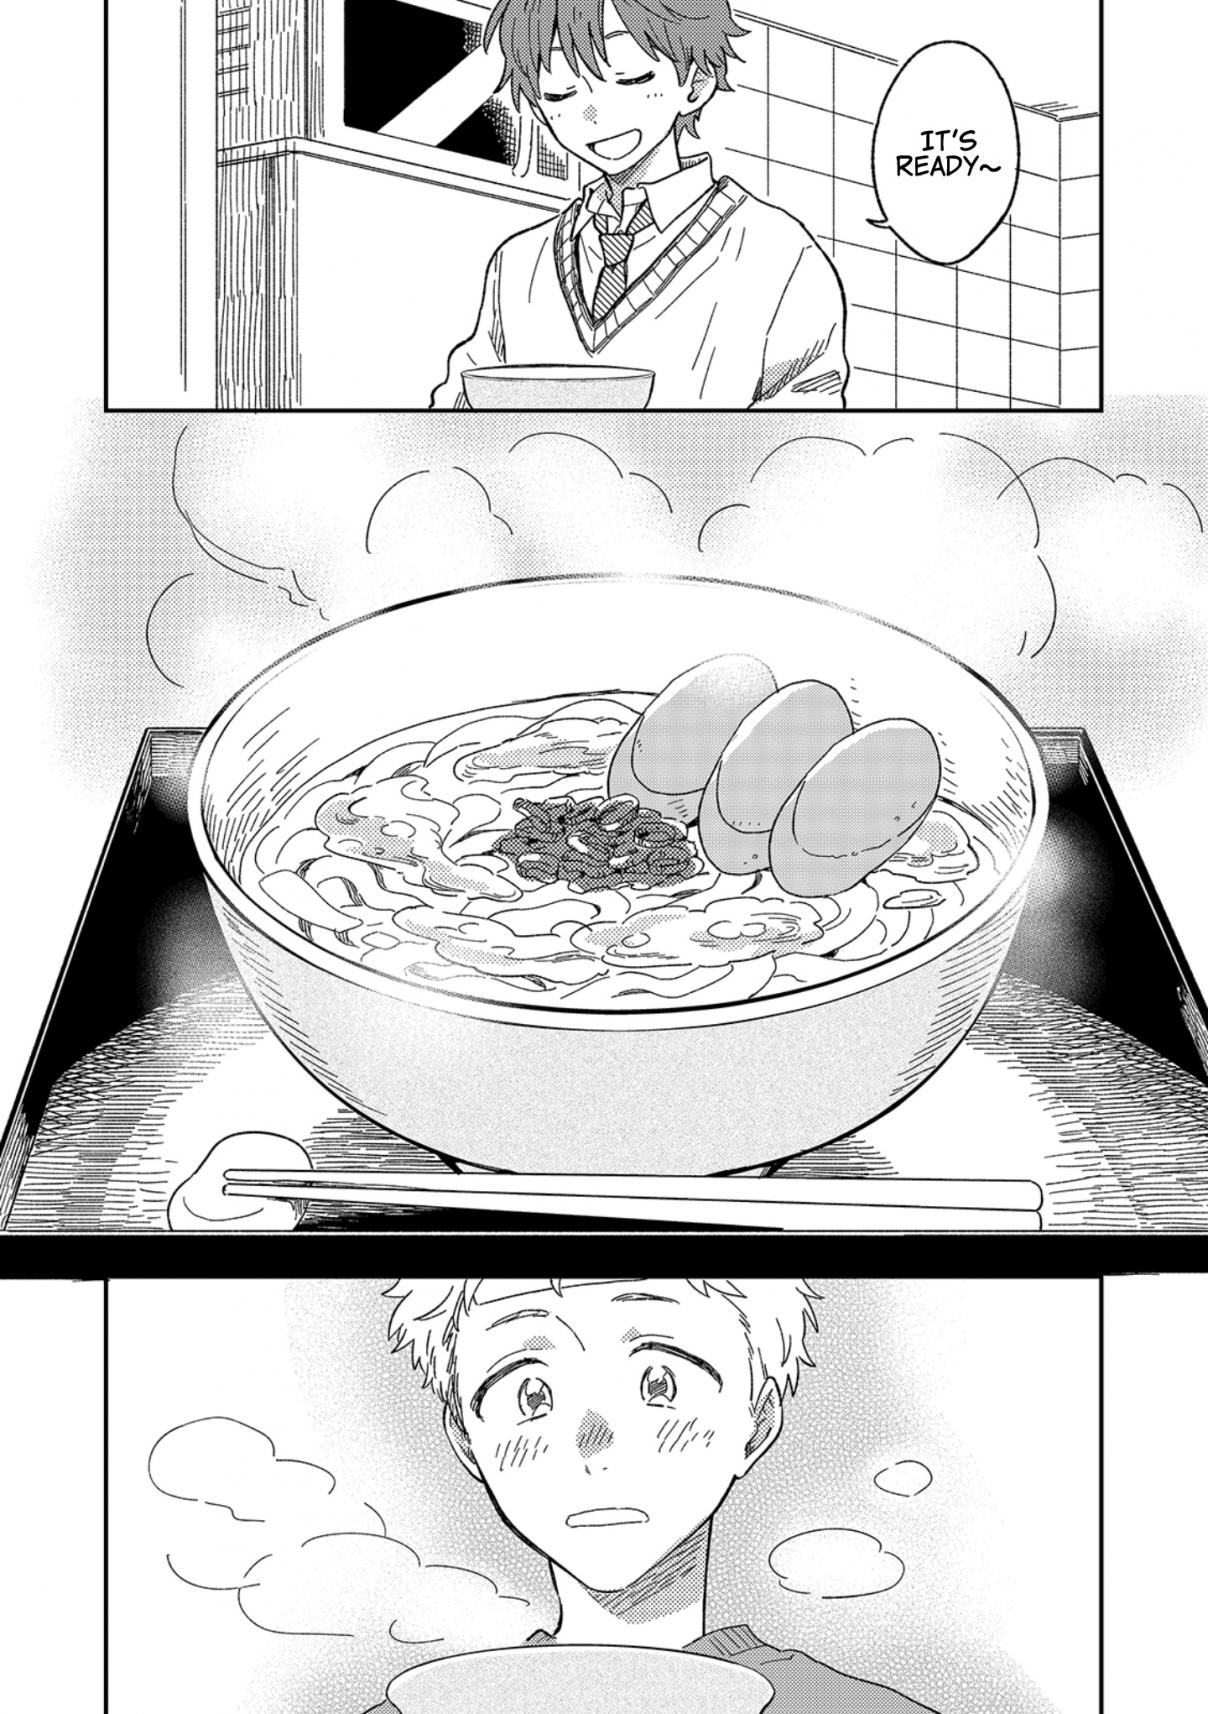 High School Boys Are Hungry Again Today Vol. 1 Ch. 6 Riku's Udon for a Sick Visit